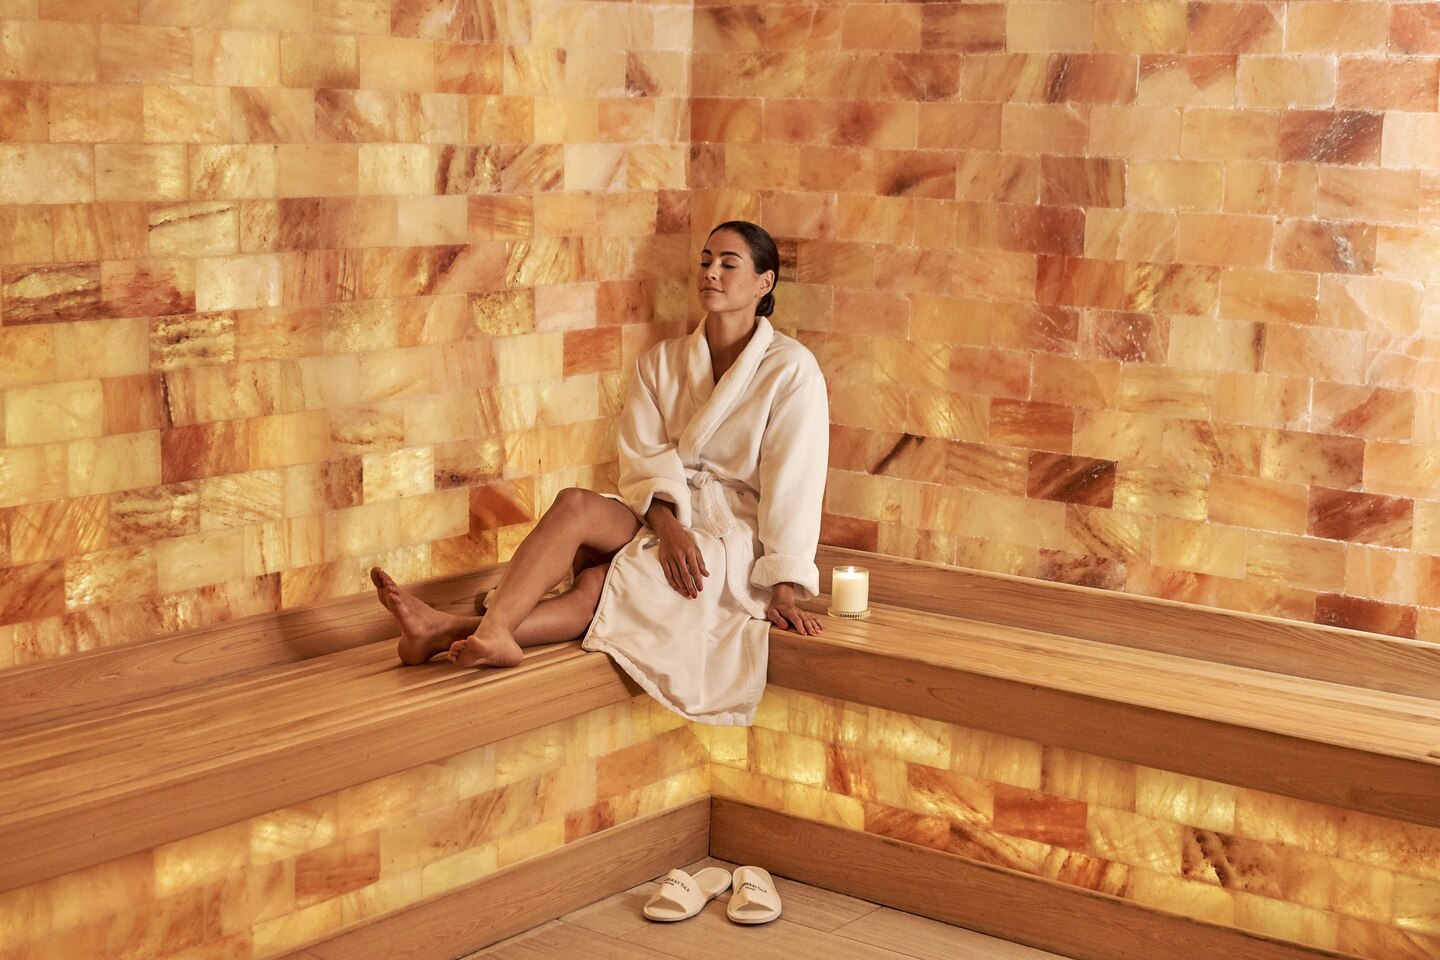 Woman In A White Robe Relaxing On A Light Brown Wooden Bench With Himalayan Salt Panel Walls At The Jw Marriott Turnberry - Aventura, Florida.